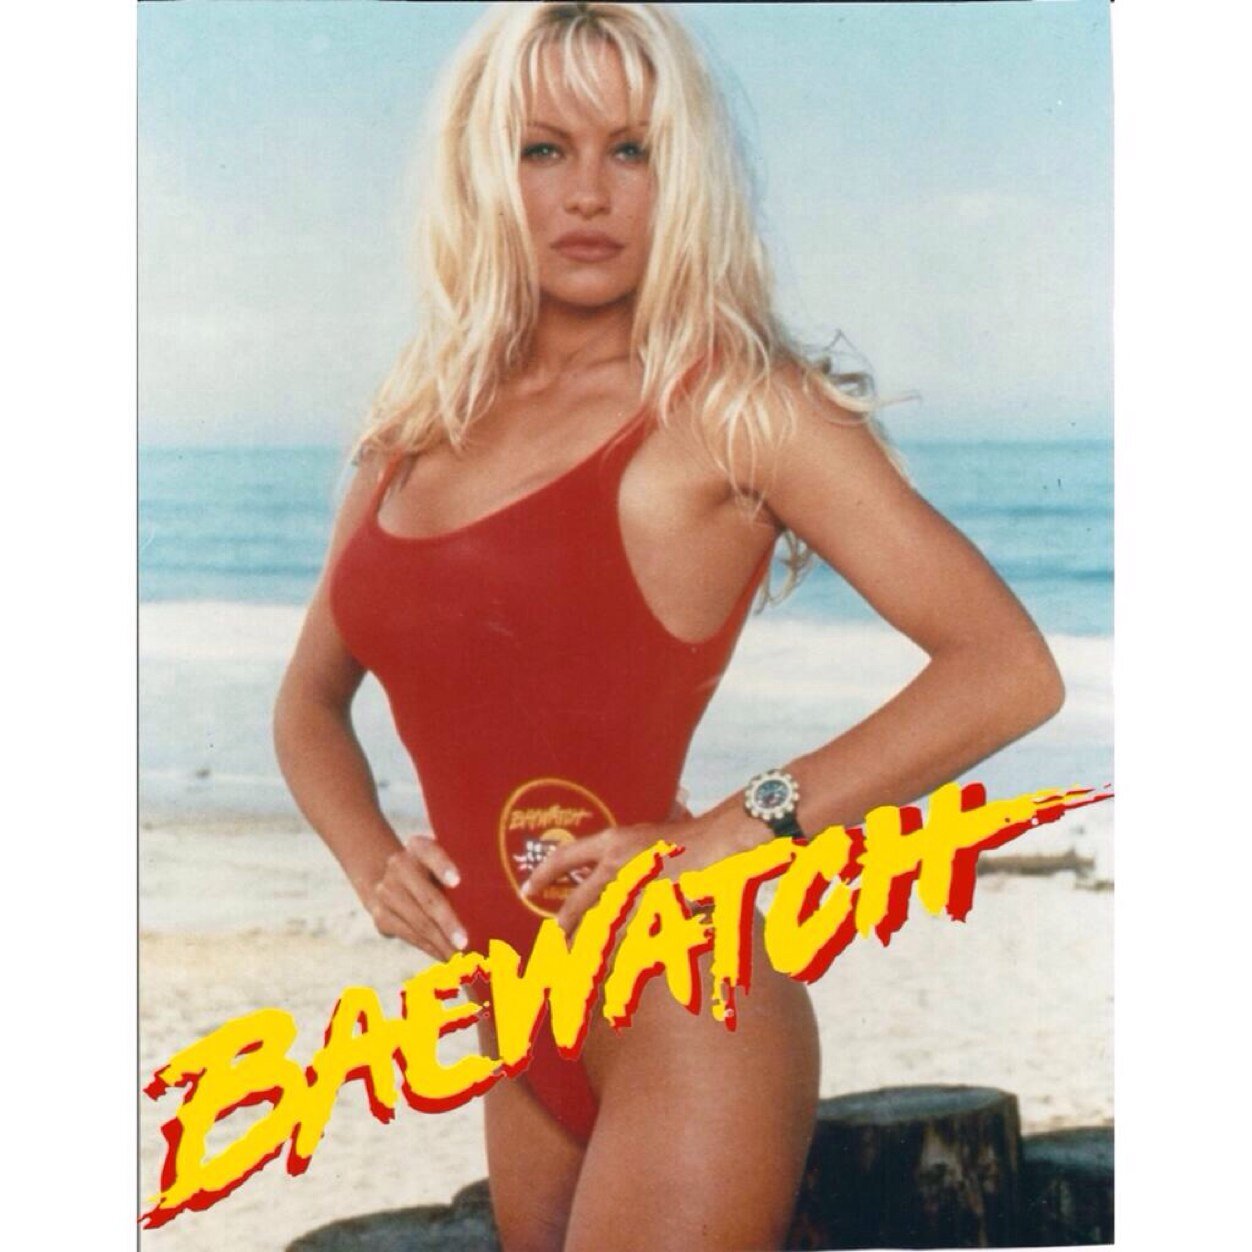 Every bae is beautiful. #BaeWatch. We r self appointed empowerers of baes. Followed by @mikewaxx 02/26/14. Badbaesonly@gmail.com for all baeworthy iLLmore entry